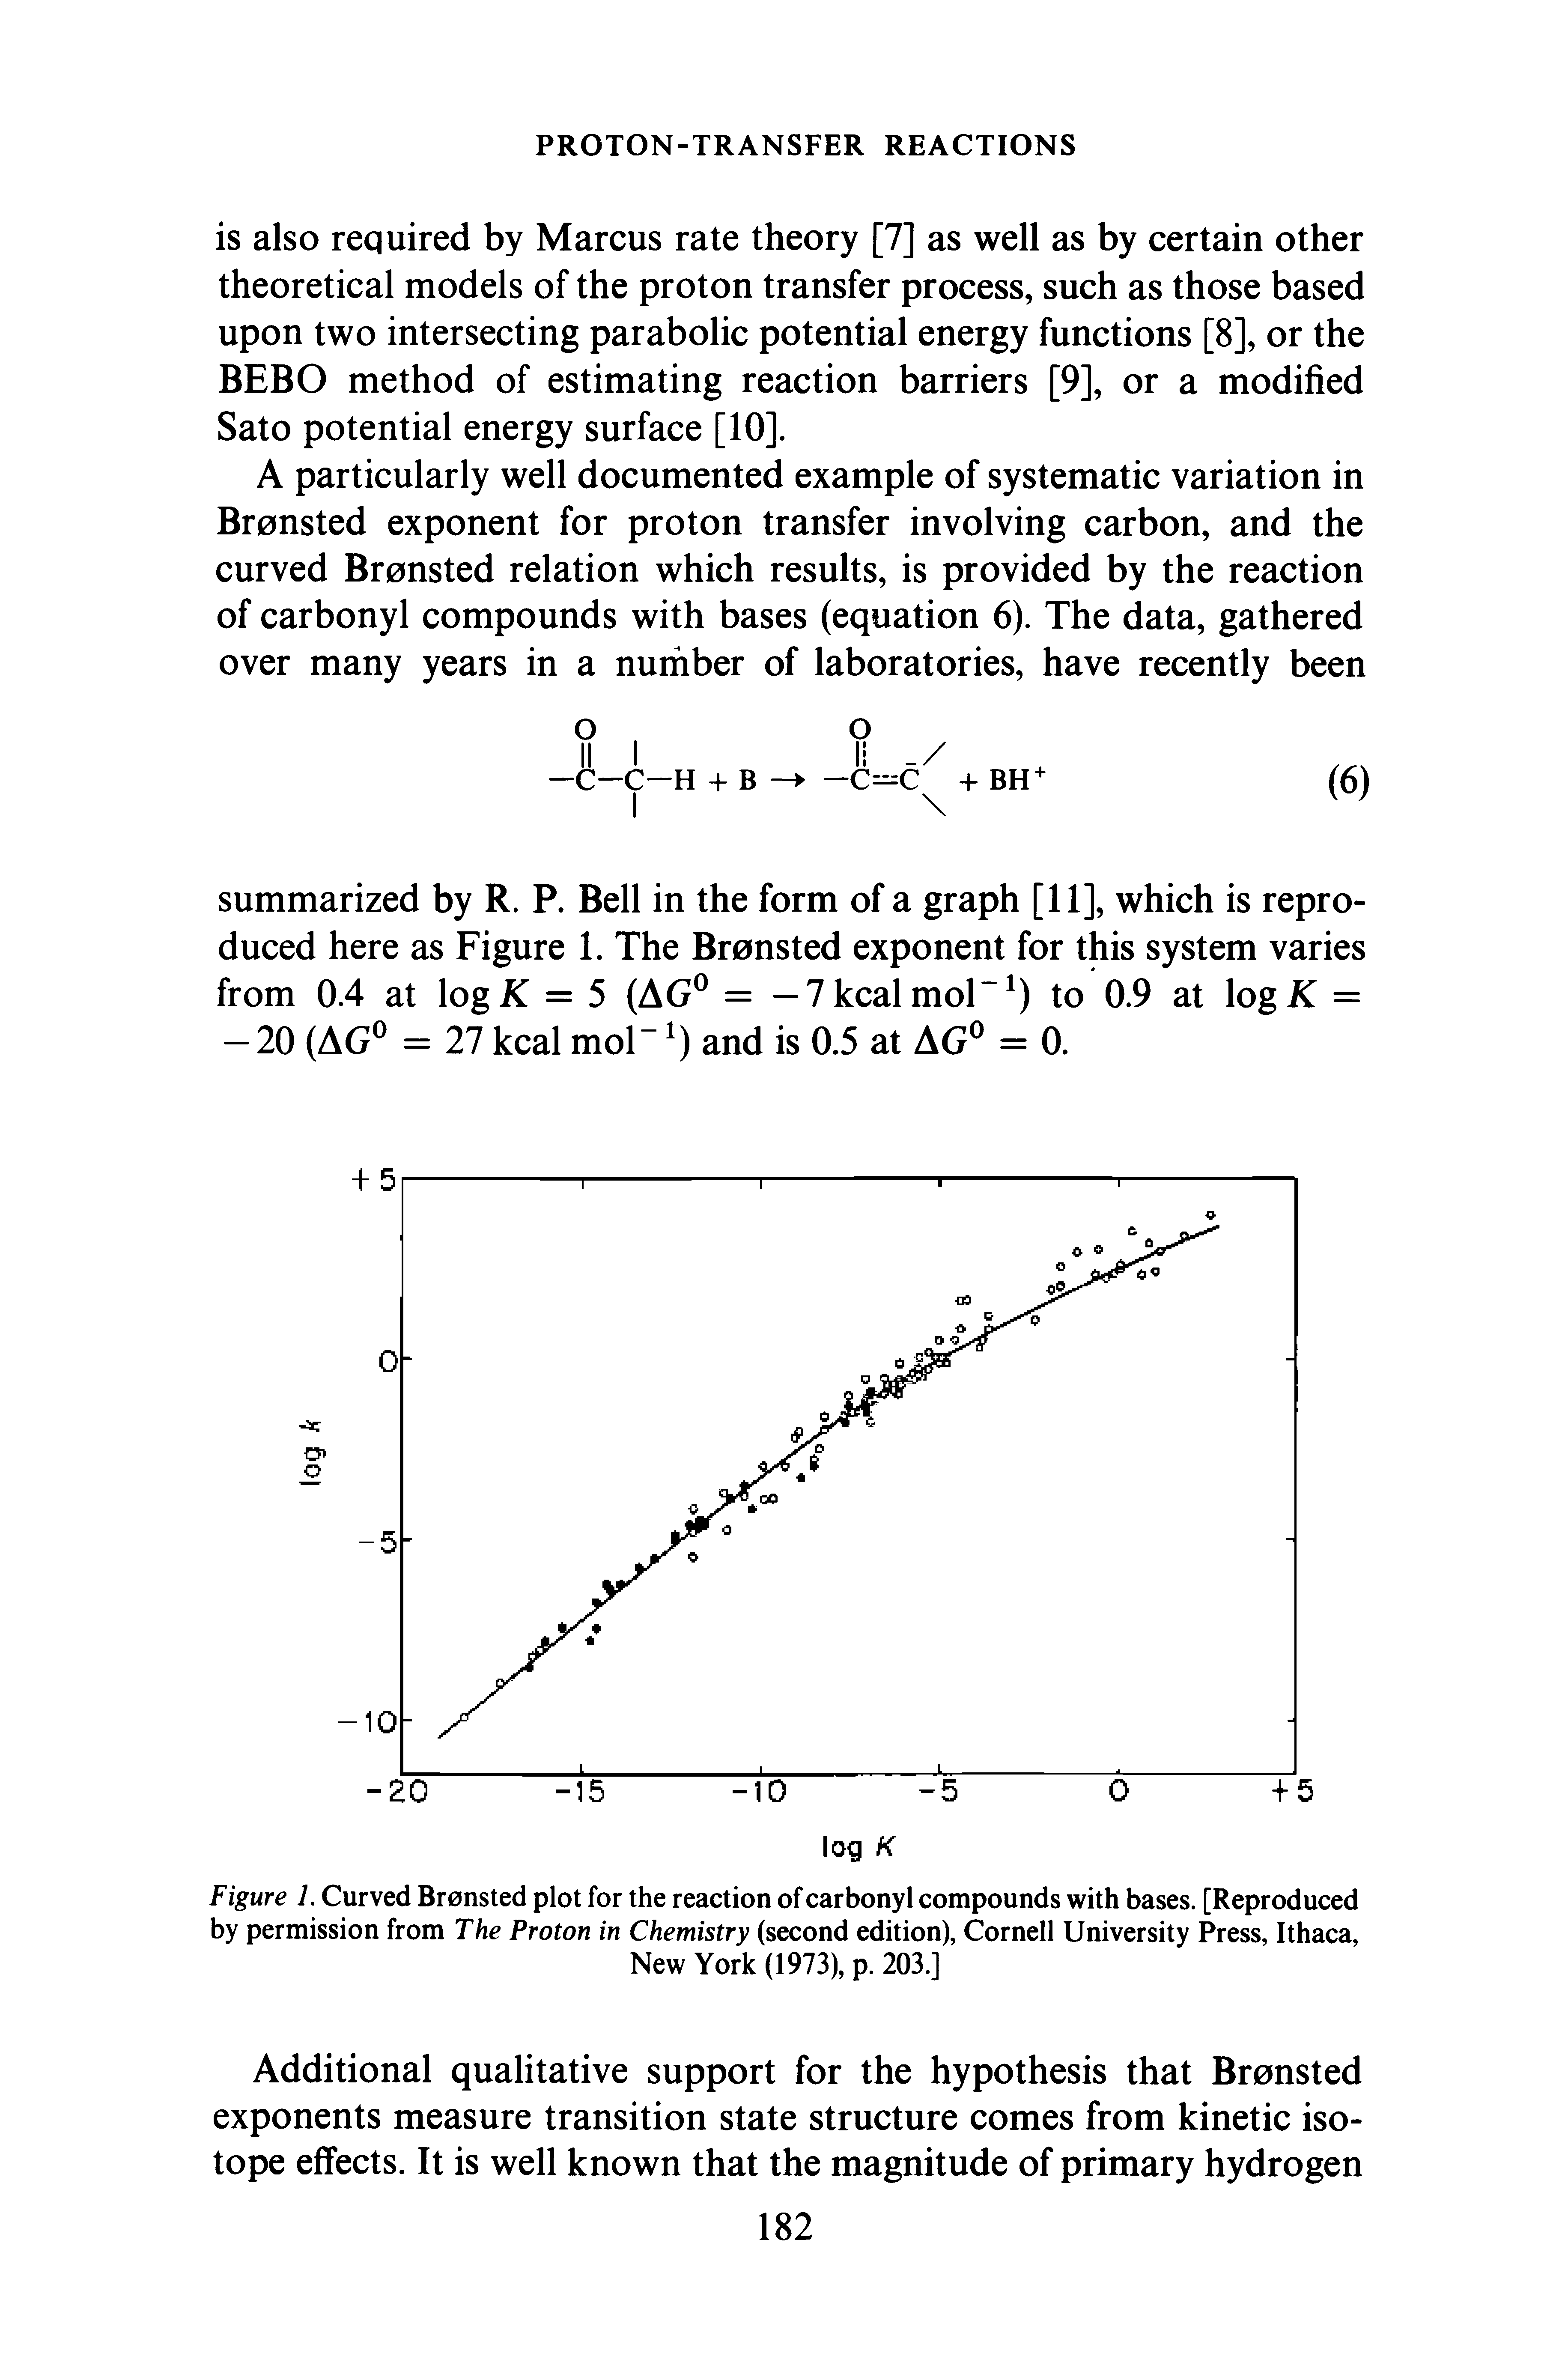 Figure 1. Curved Bronsted plot for the reaction of carbonyl compounds with bases. [Reproduced by permission from The Proton in Chemistry (second edition), Cornell University Press, Ithaca,...